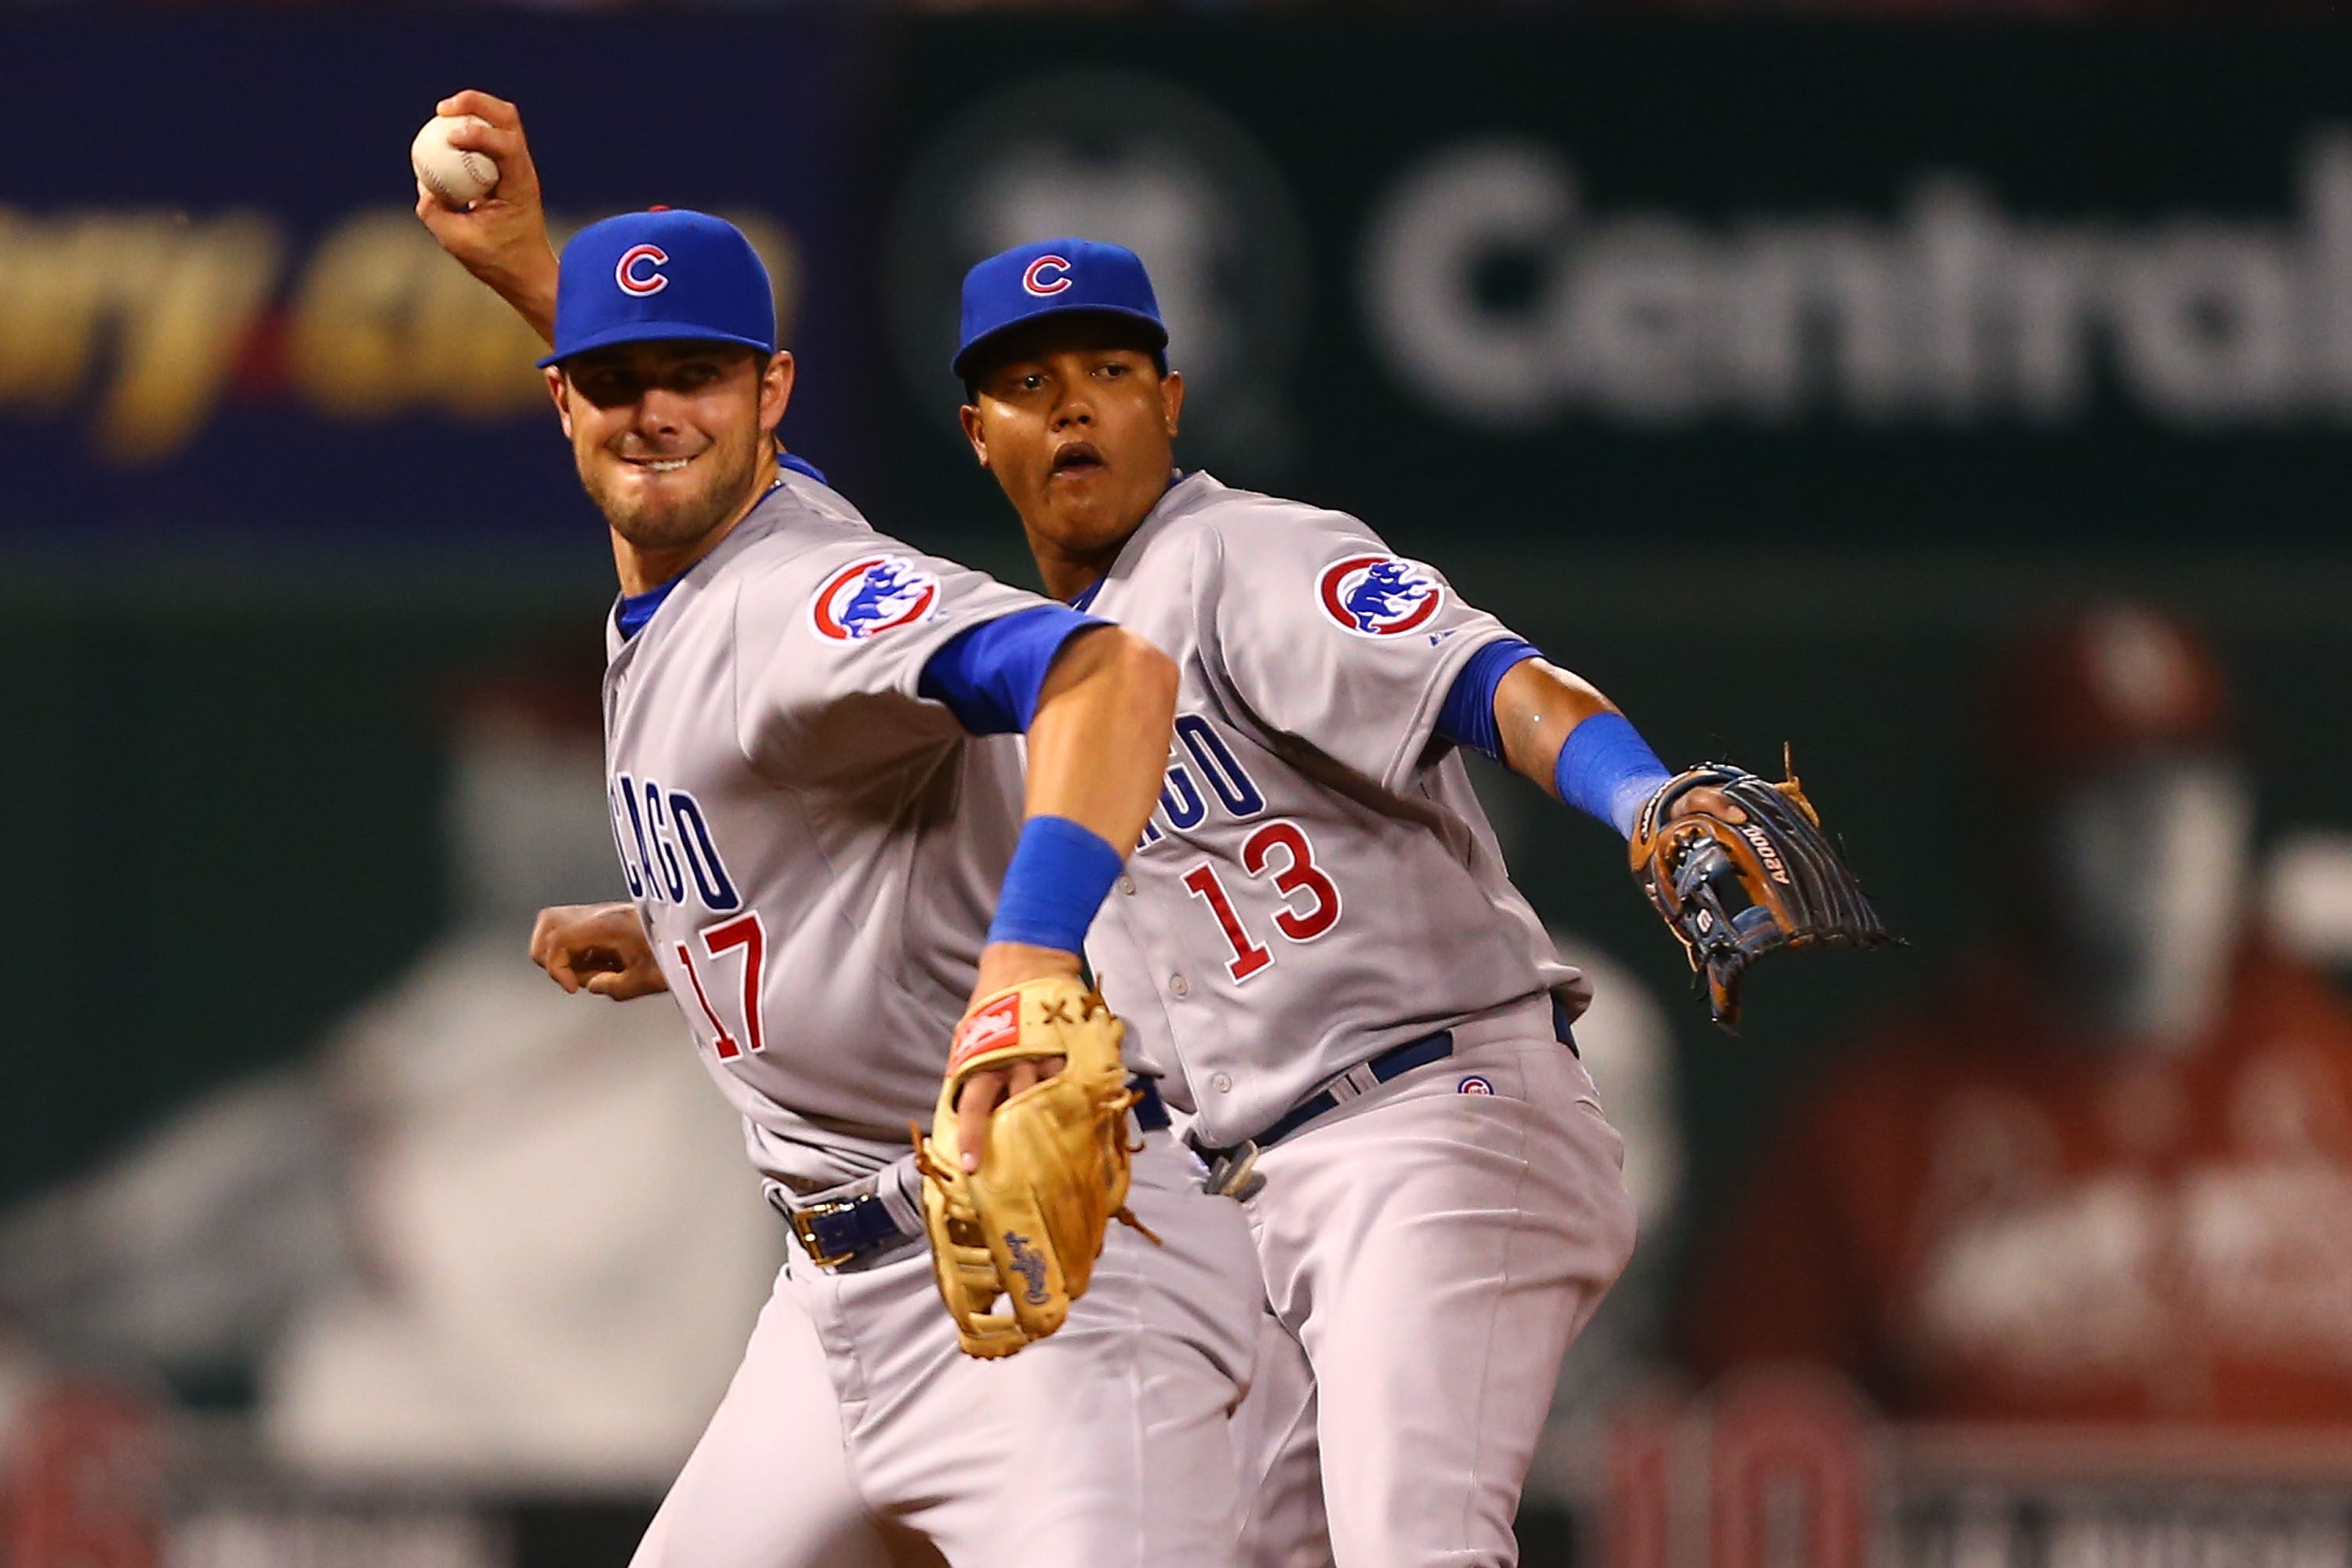 Report: Cubs shortstop Starlin Castro has $3.6 million seized in